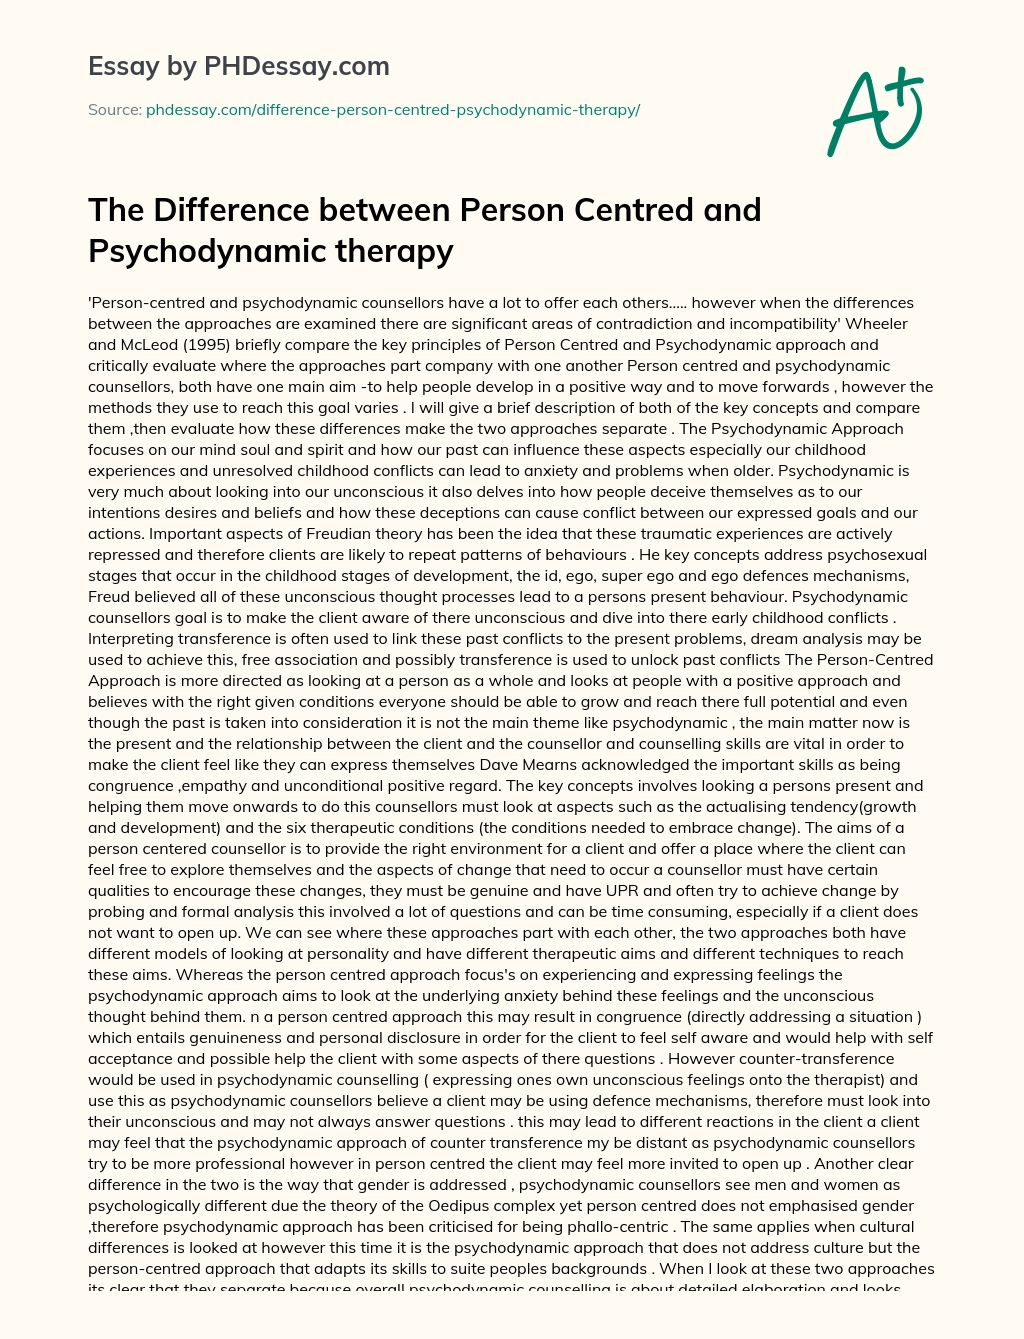 The Difference between Person Centred and Psychodynamic therapy essay